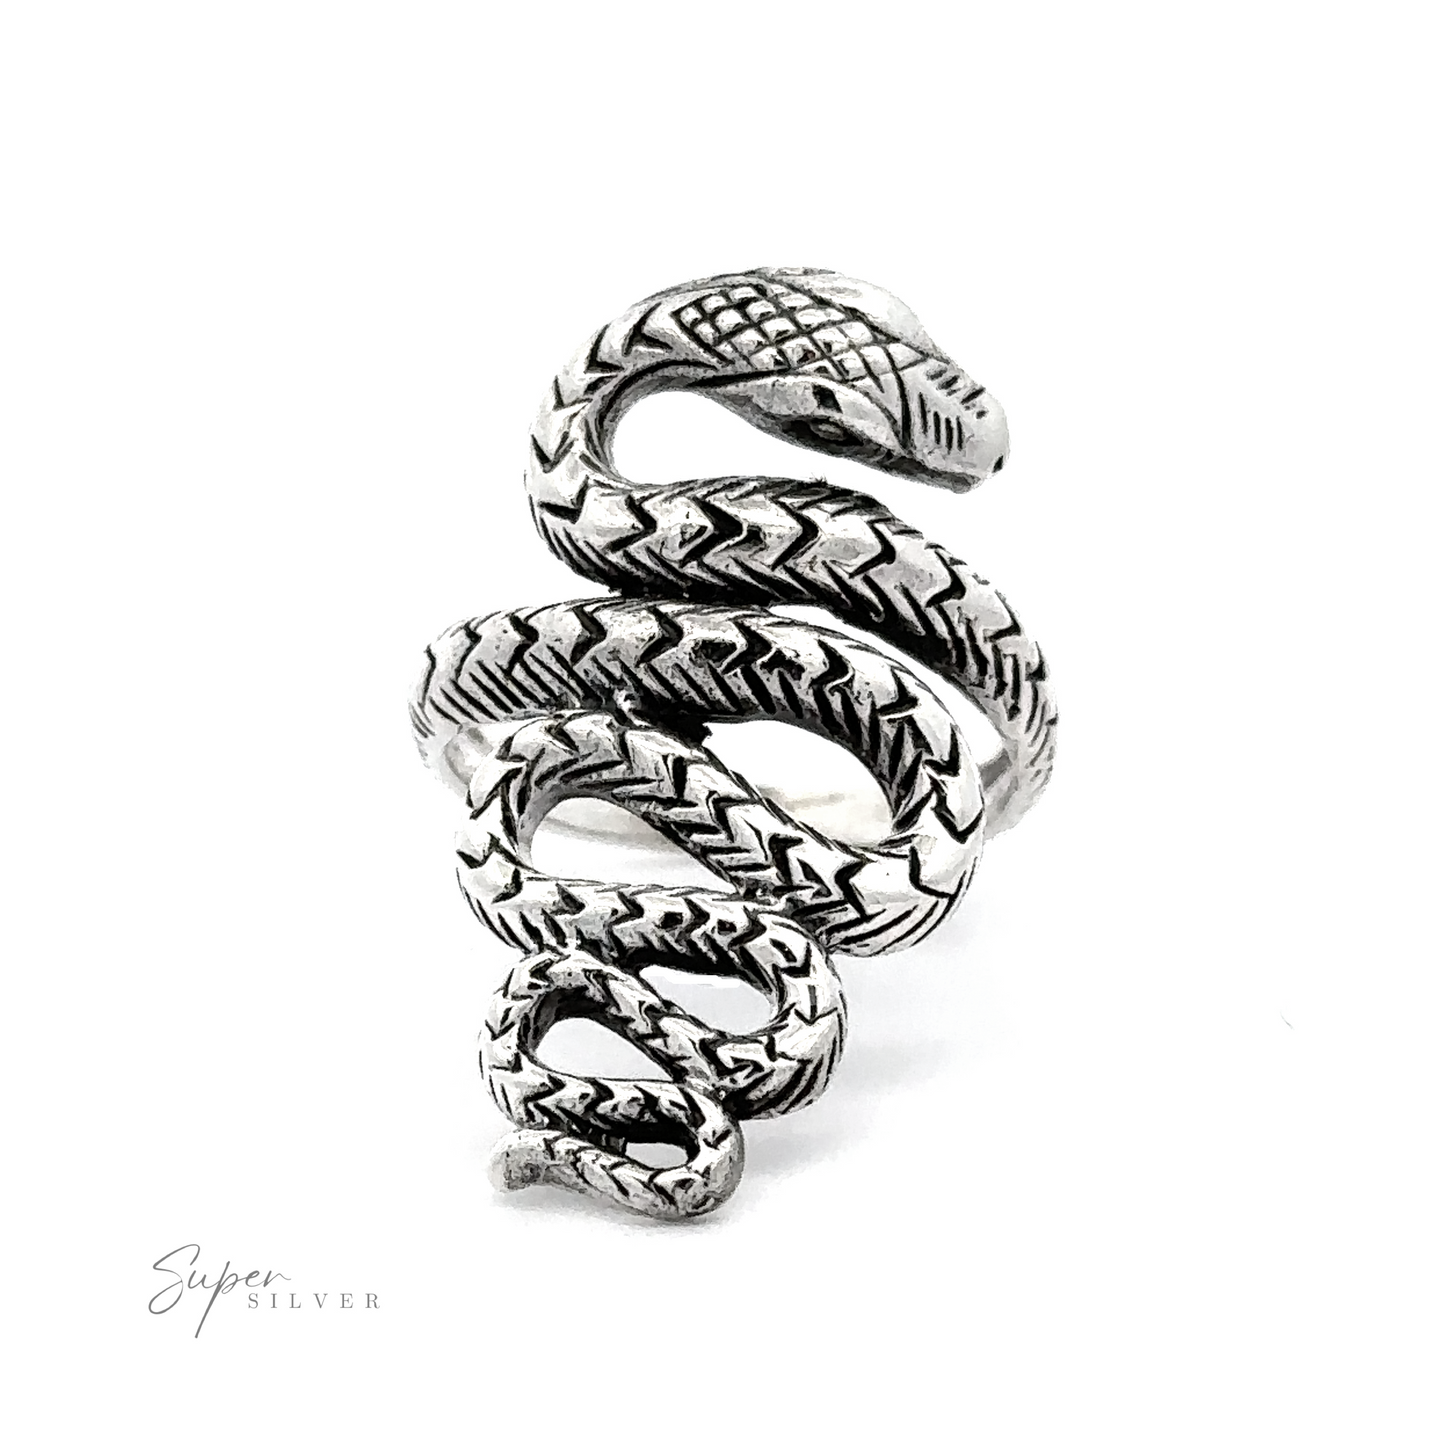 A slithering snake ring featuring intricate etched patterns, displayed on a white background with a signature "super silver" at the bottom.